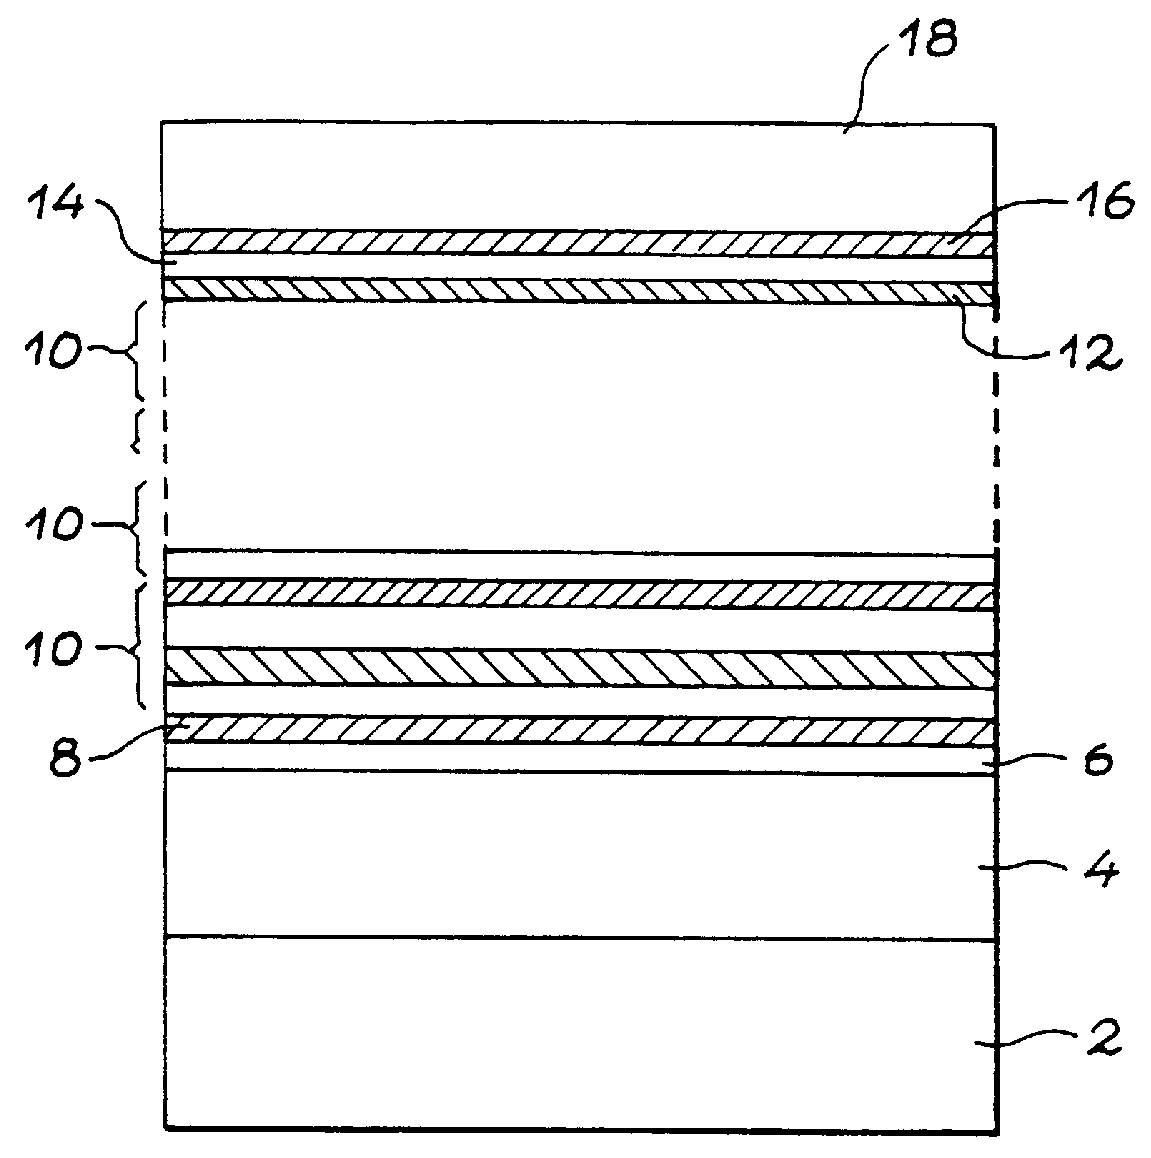 Multi-layer structure and sensor and manufacturing process